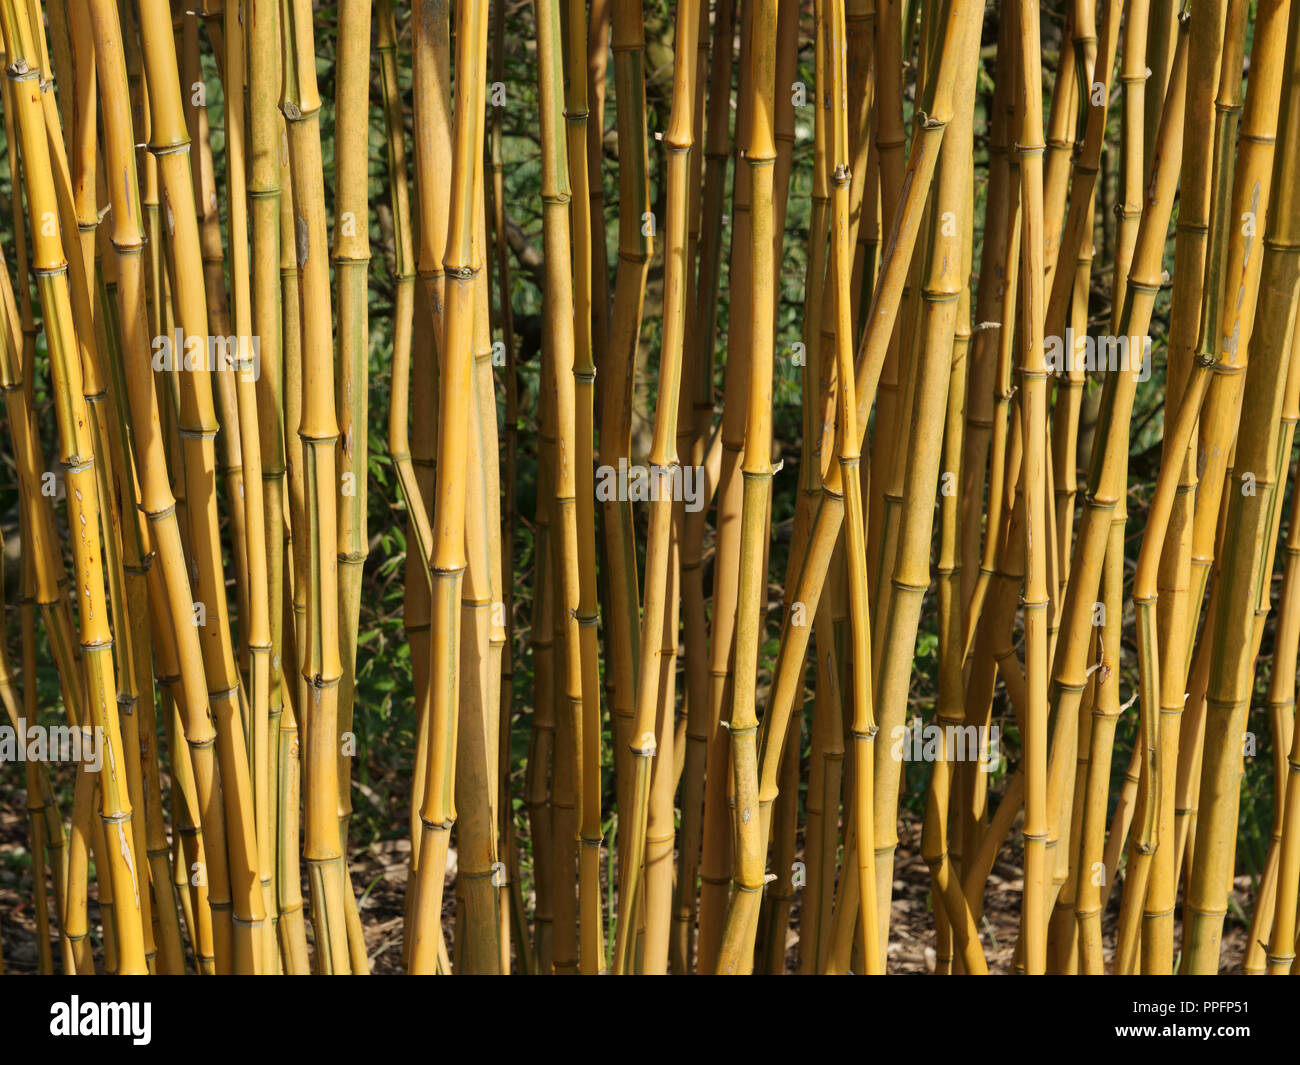 Early spring in the garden. Densely packed shiny yellow stems of the tall growing bamboo Phyllostachys aureosulcata f. spectabilis in the garden. Stock Photo